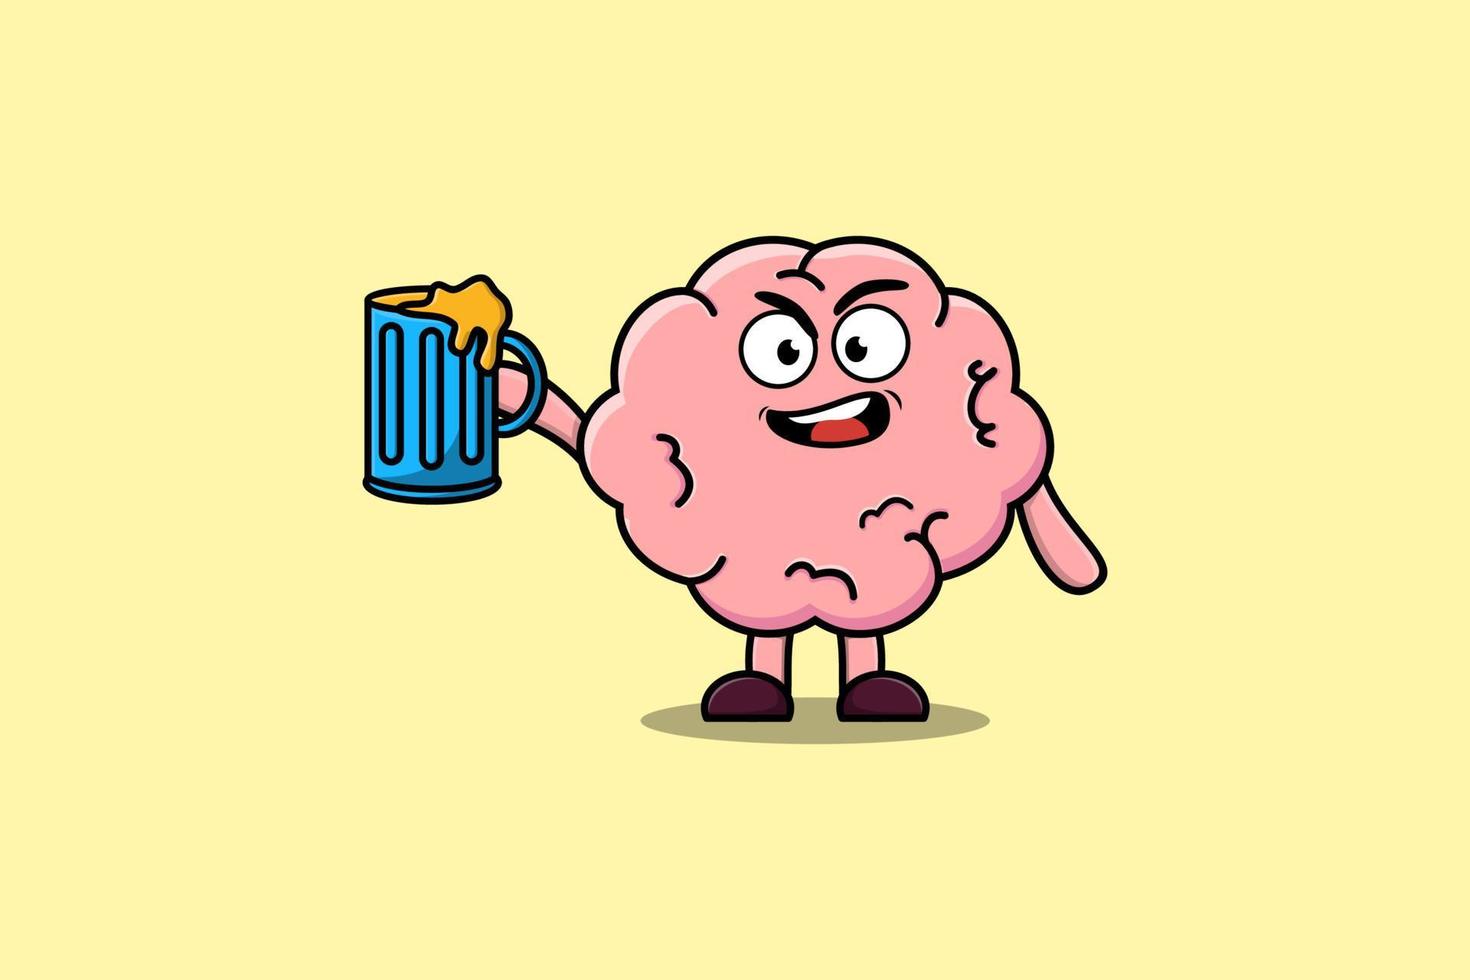 Cute Brain cartoon character with beer glass vector